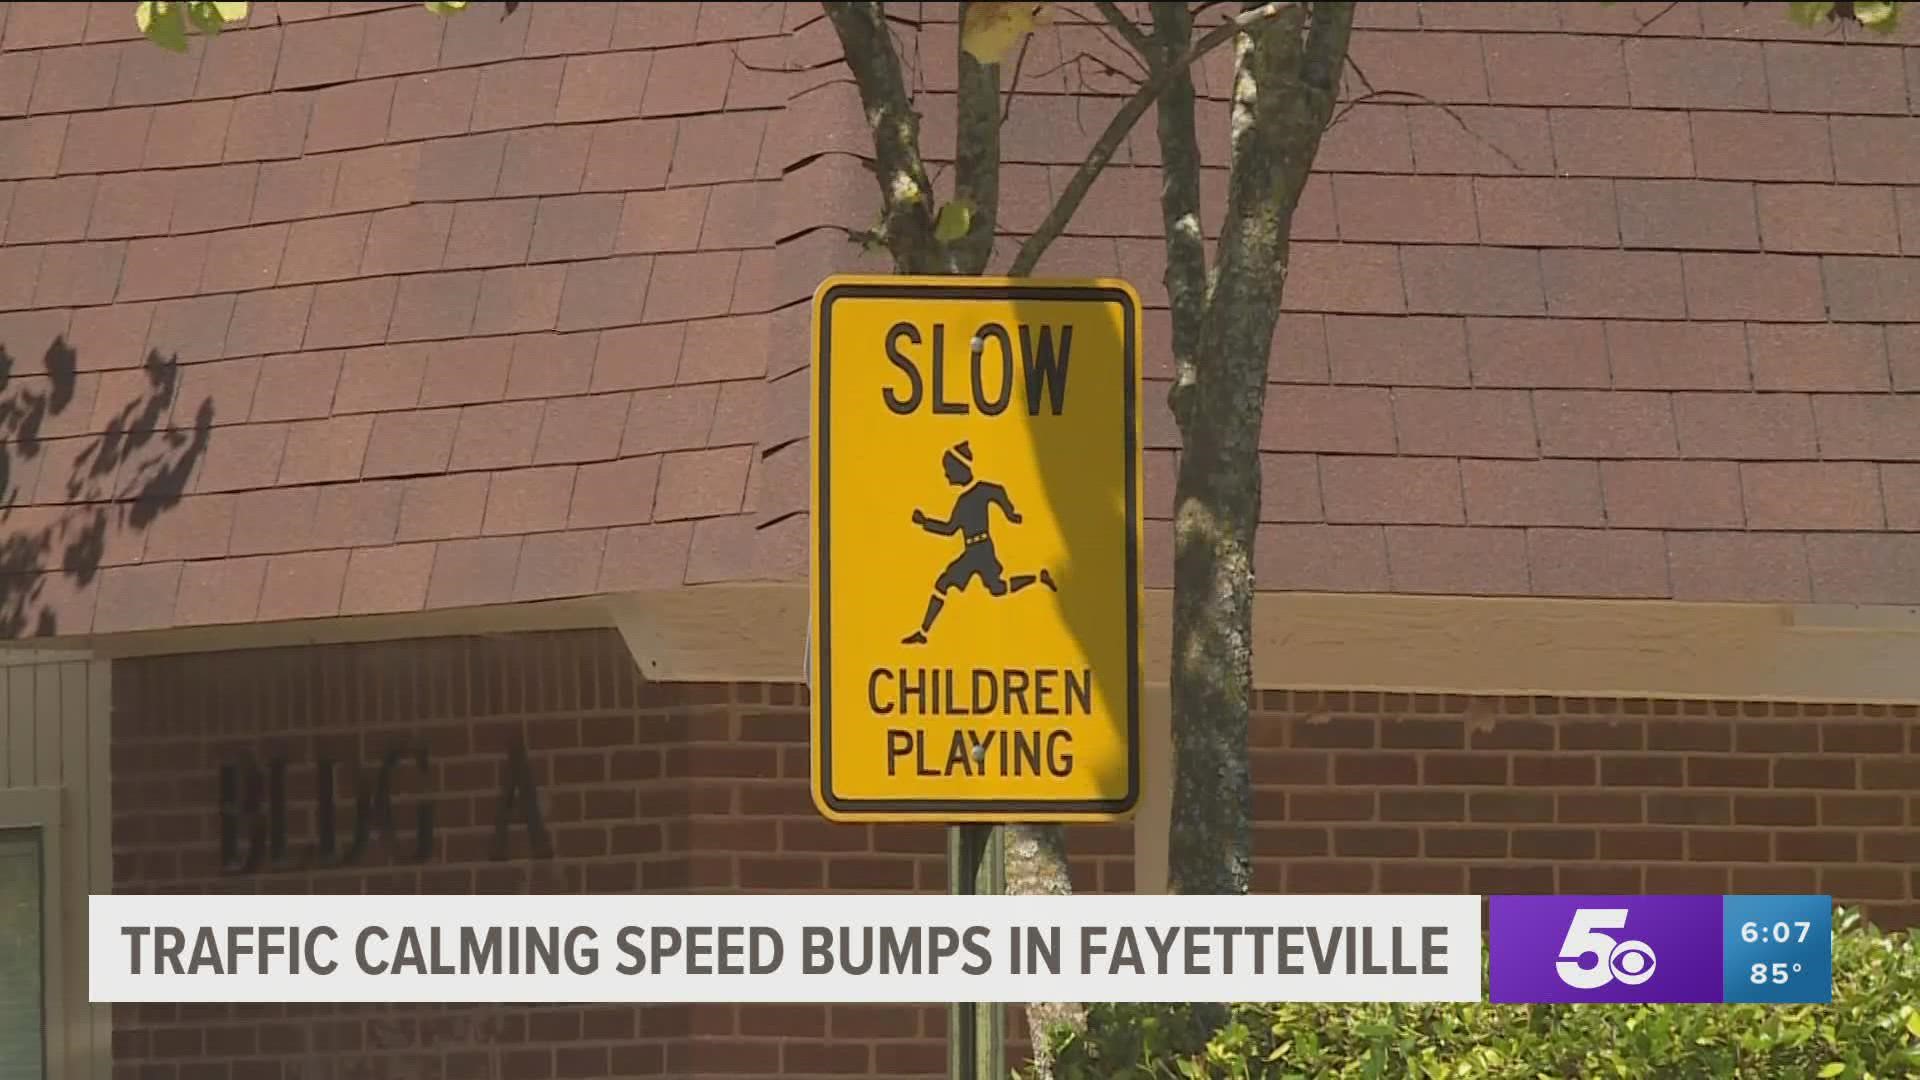 Speed cushions will be installed in Fayetteville to combat speeding as part of the City's new traffic policy.